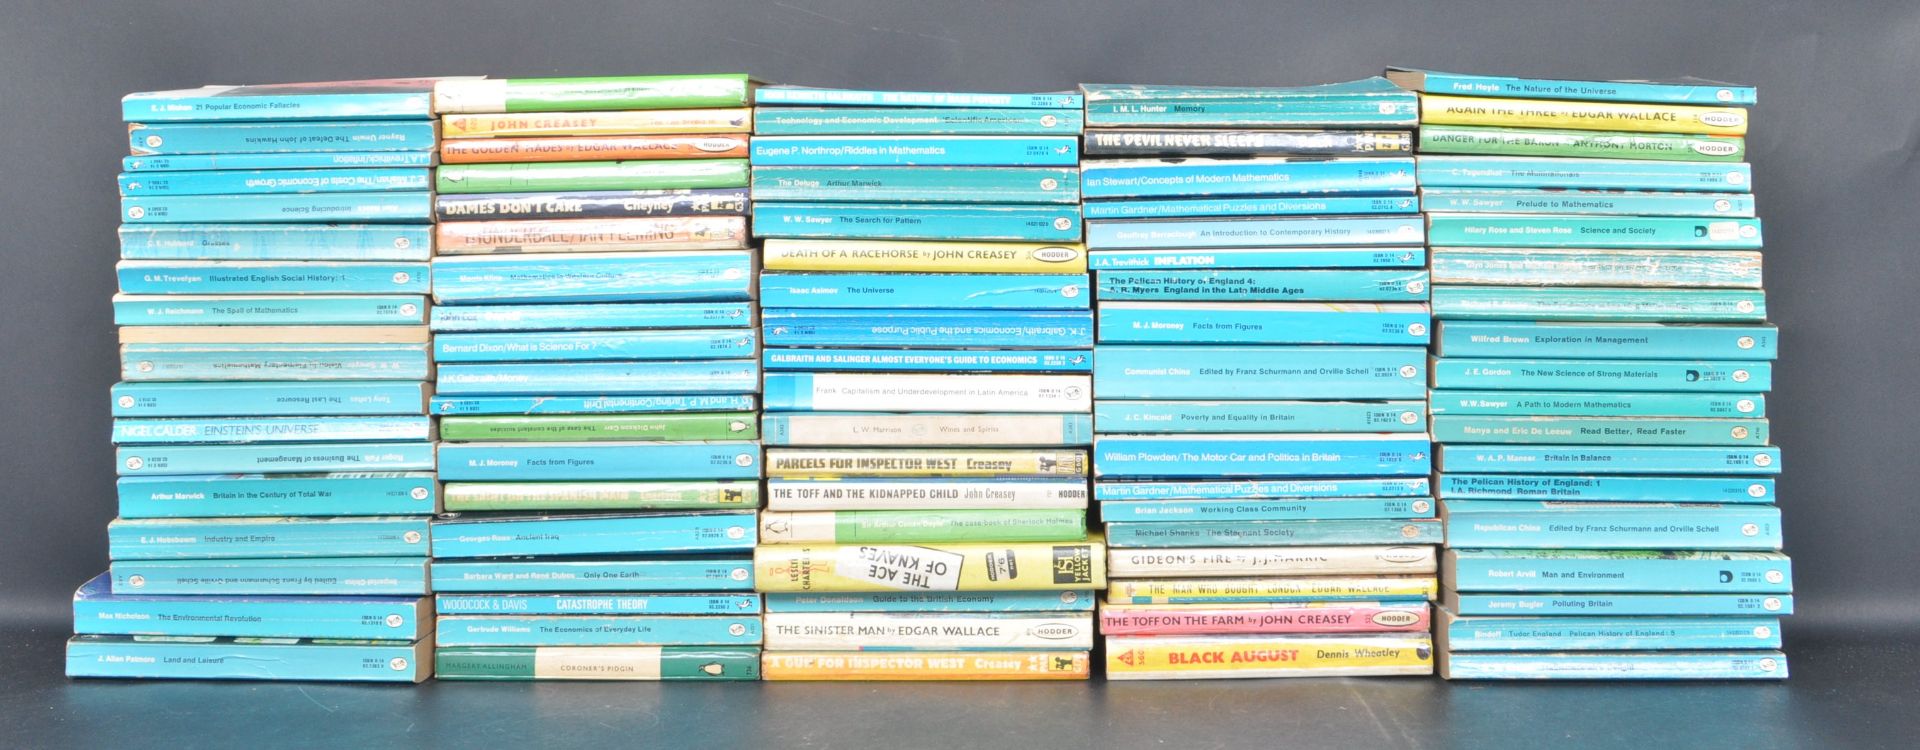 LARGE COLLECTION OF VINTAGE 20TH CENTURY HARDBACK FICTION